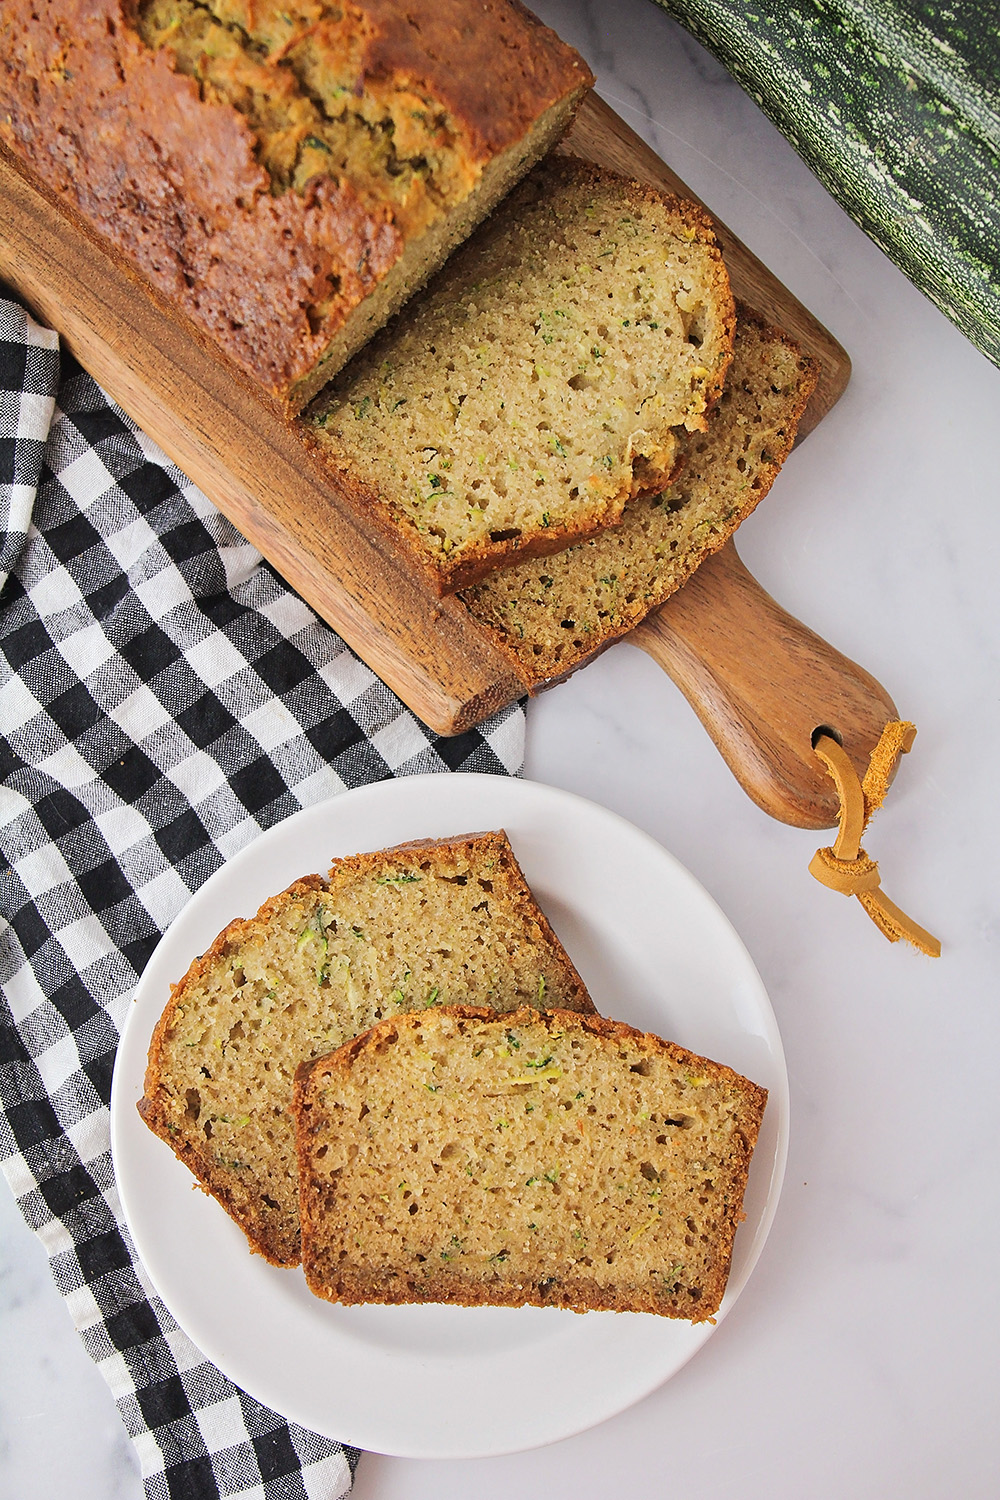 This delicious homemade zucchini bread is so tender and moist, with the perfect amount of sweetness!